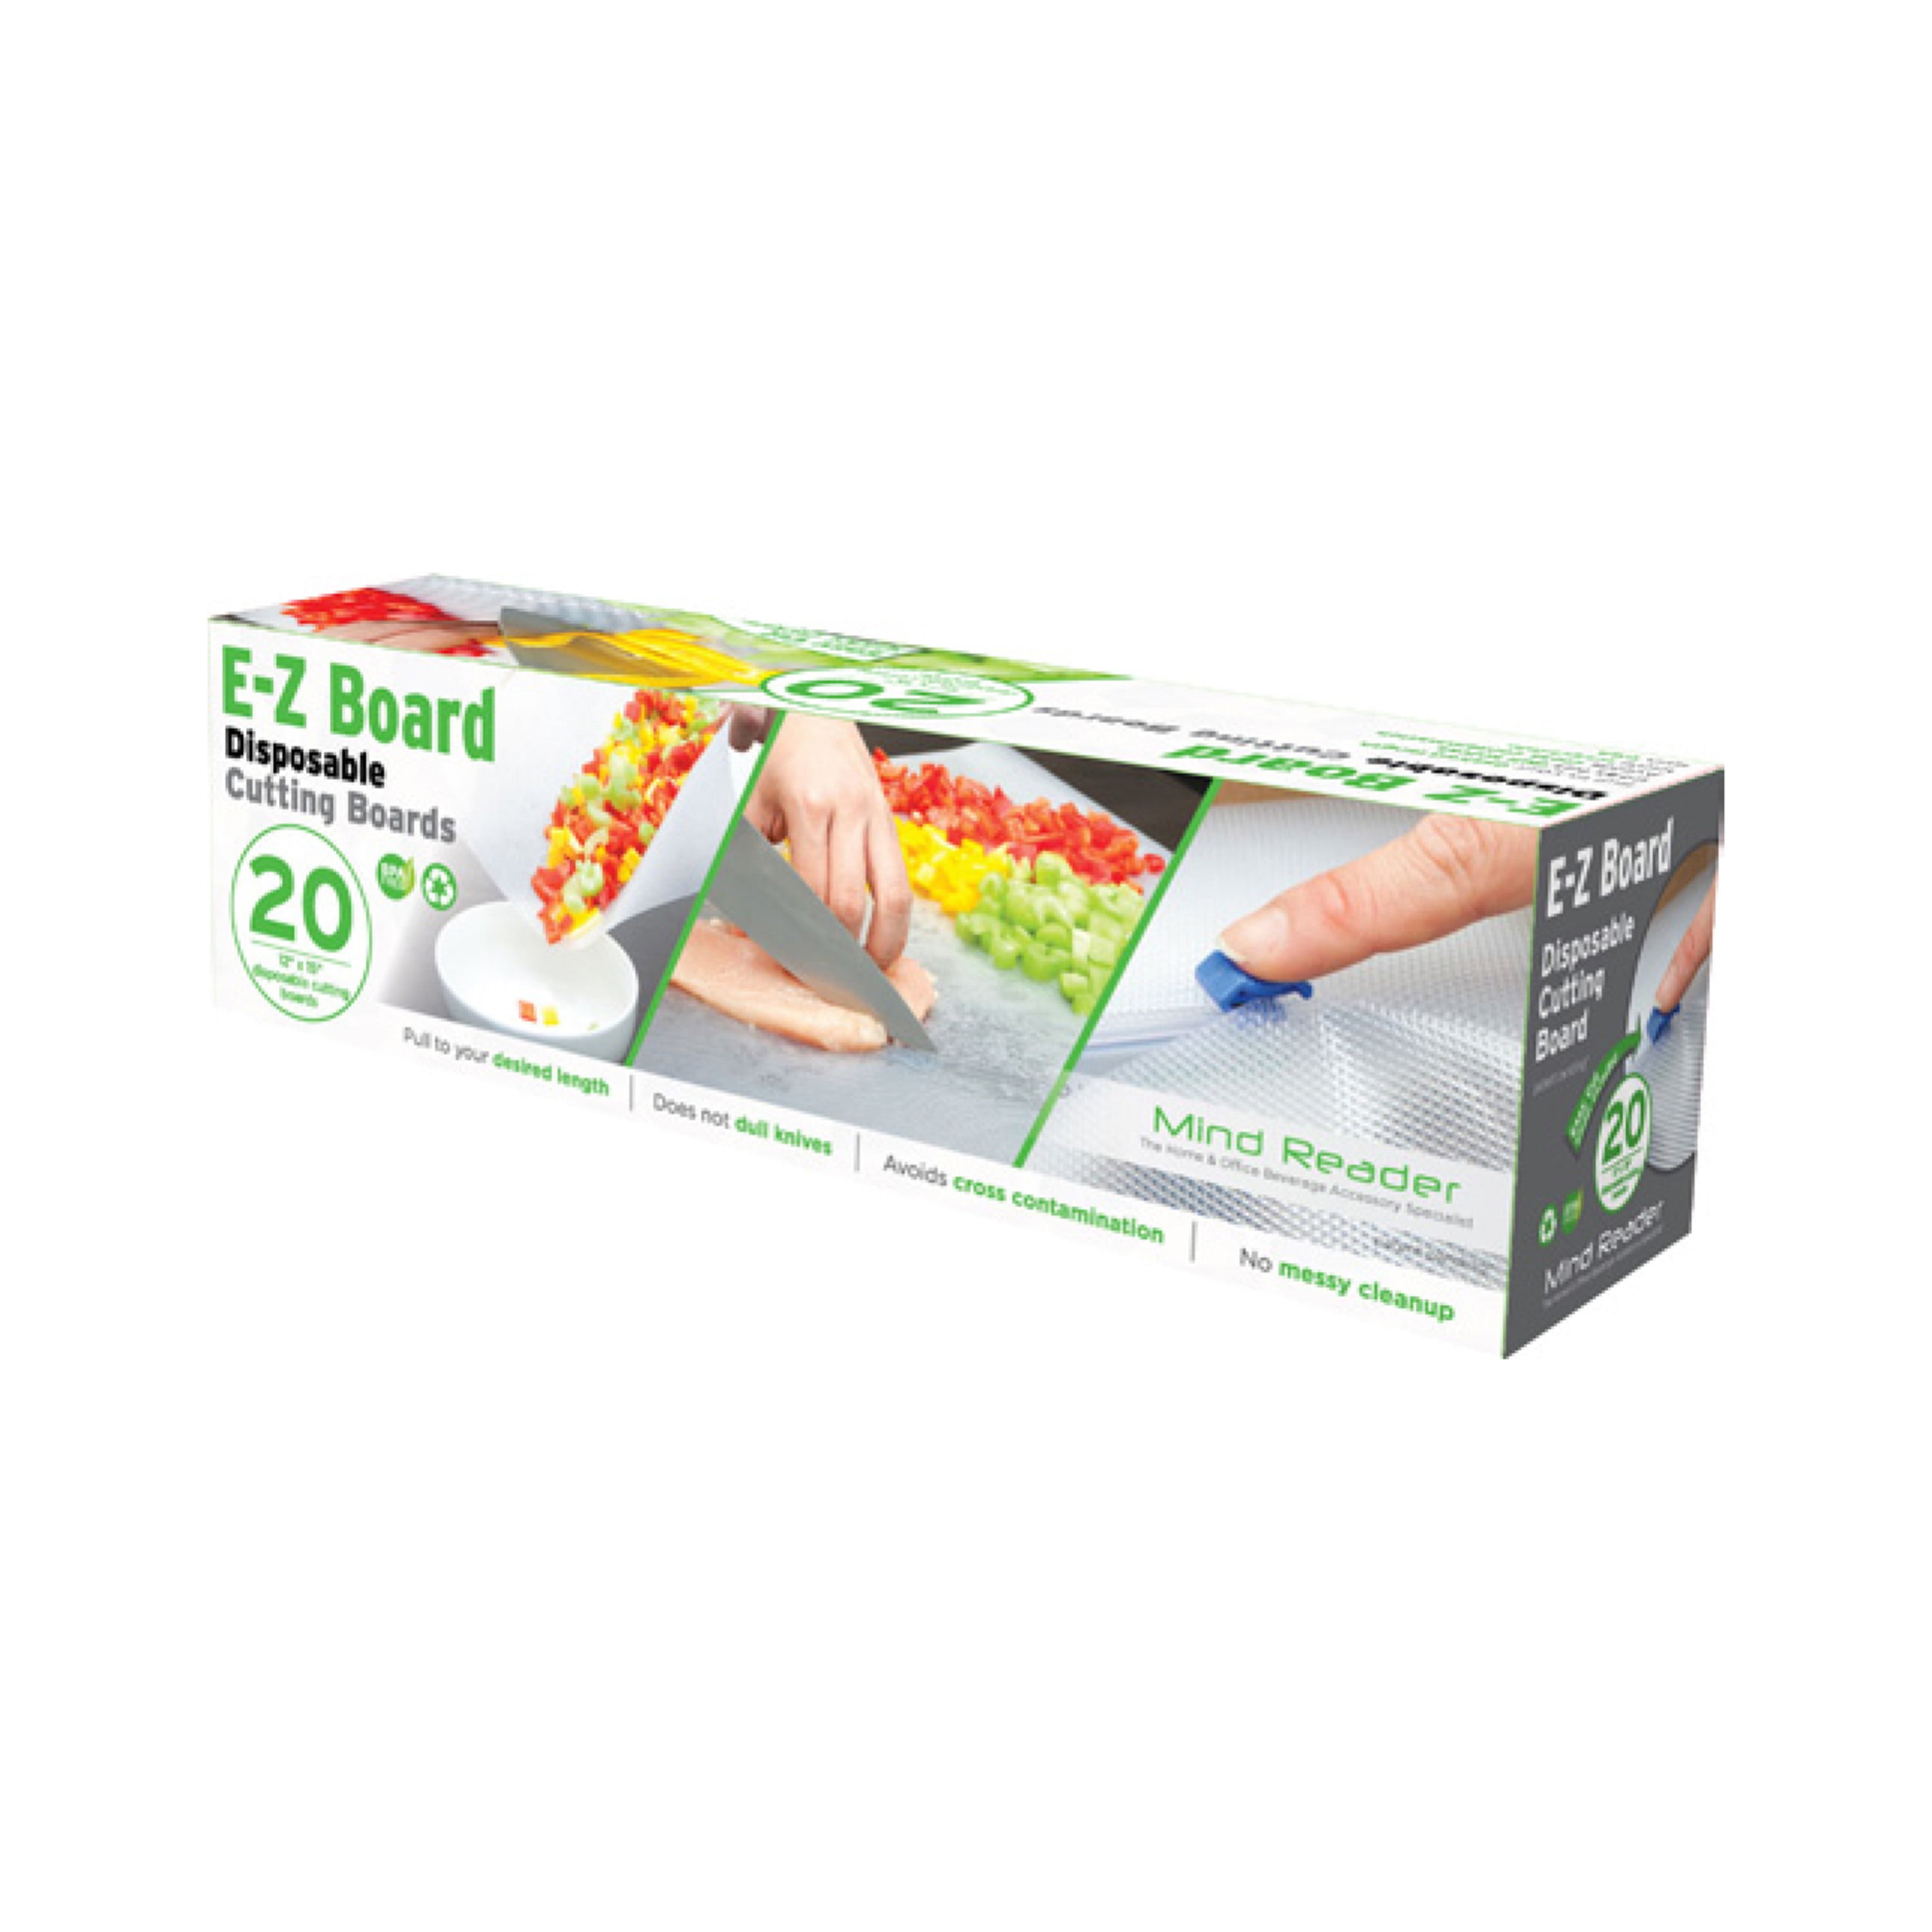 Saran Disposable Cutting Sheets 20 Boards Discontinued - H4 for sale online